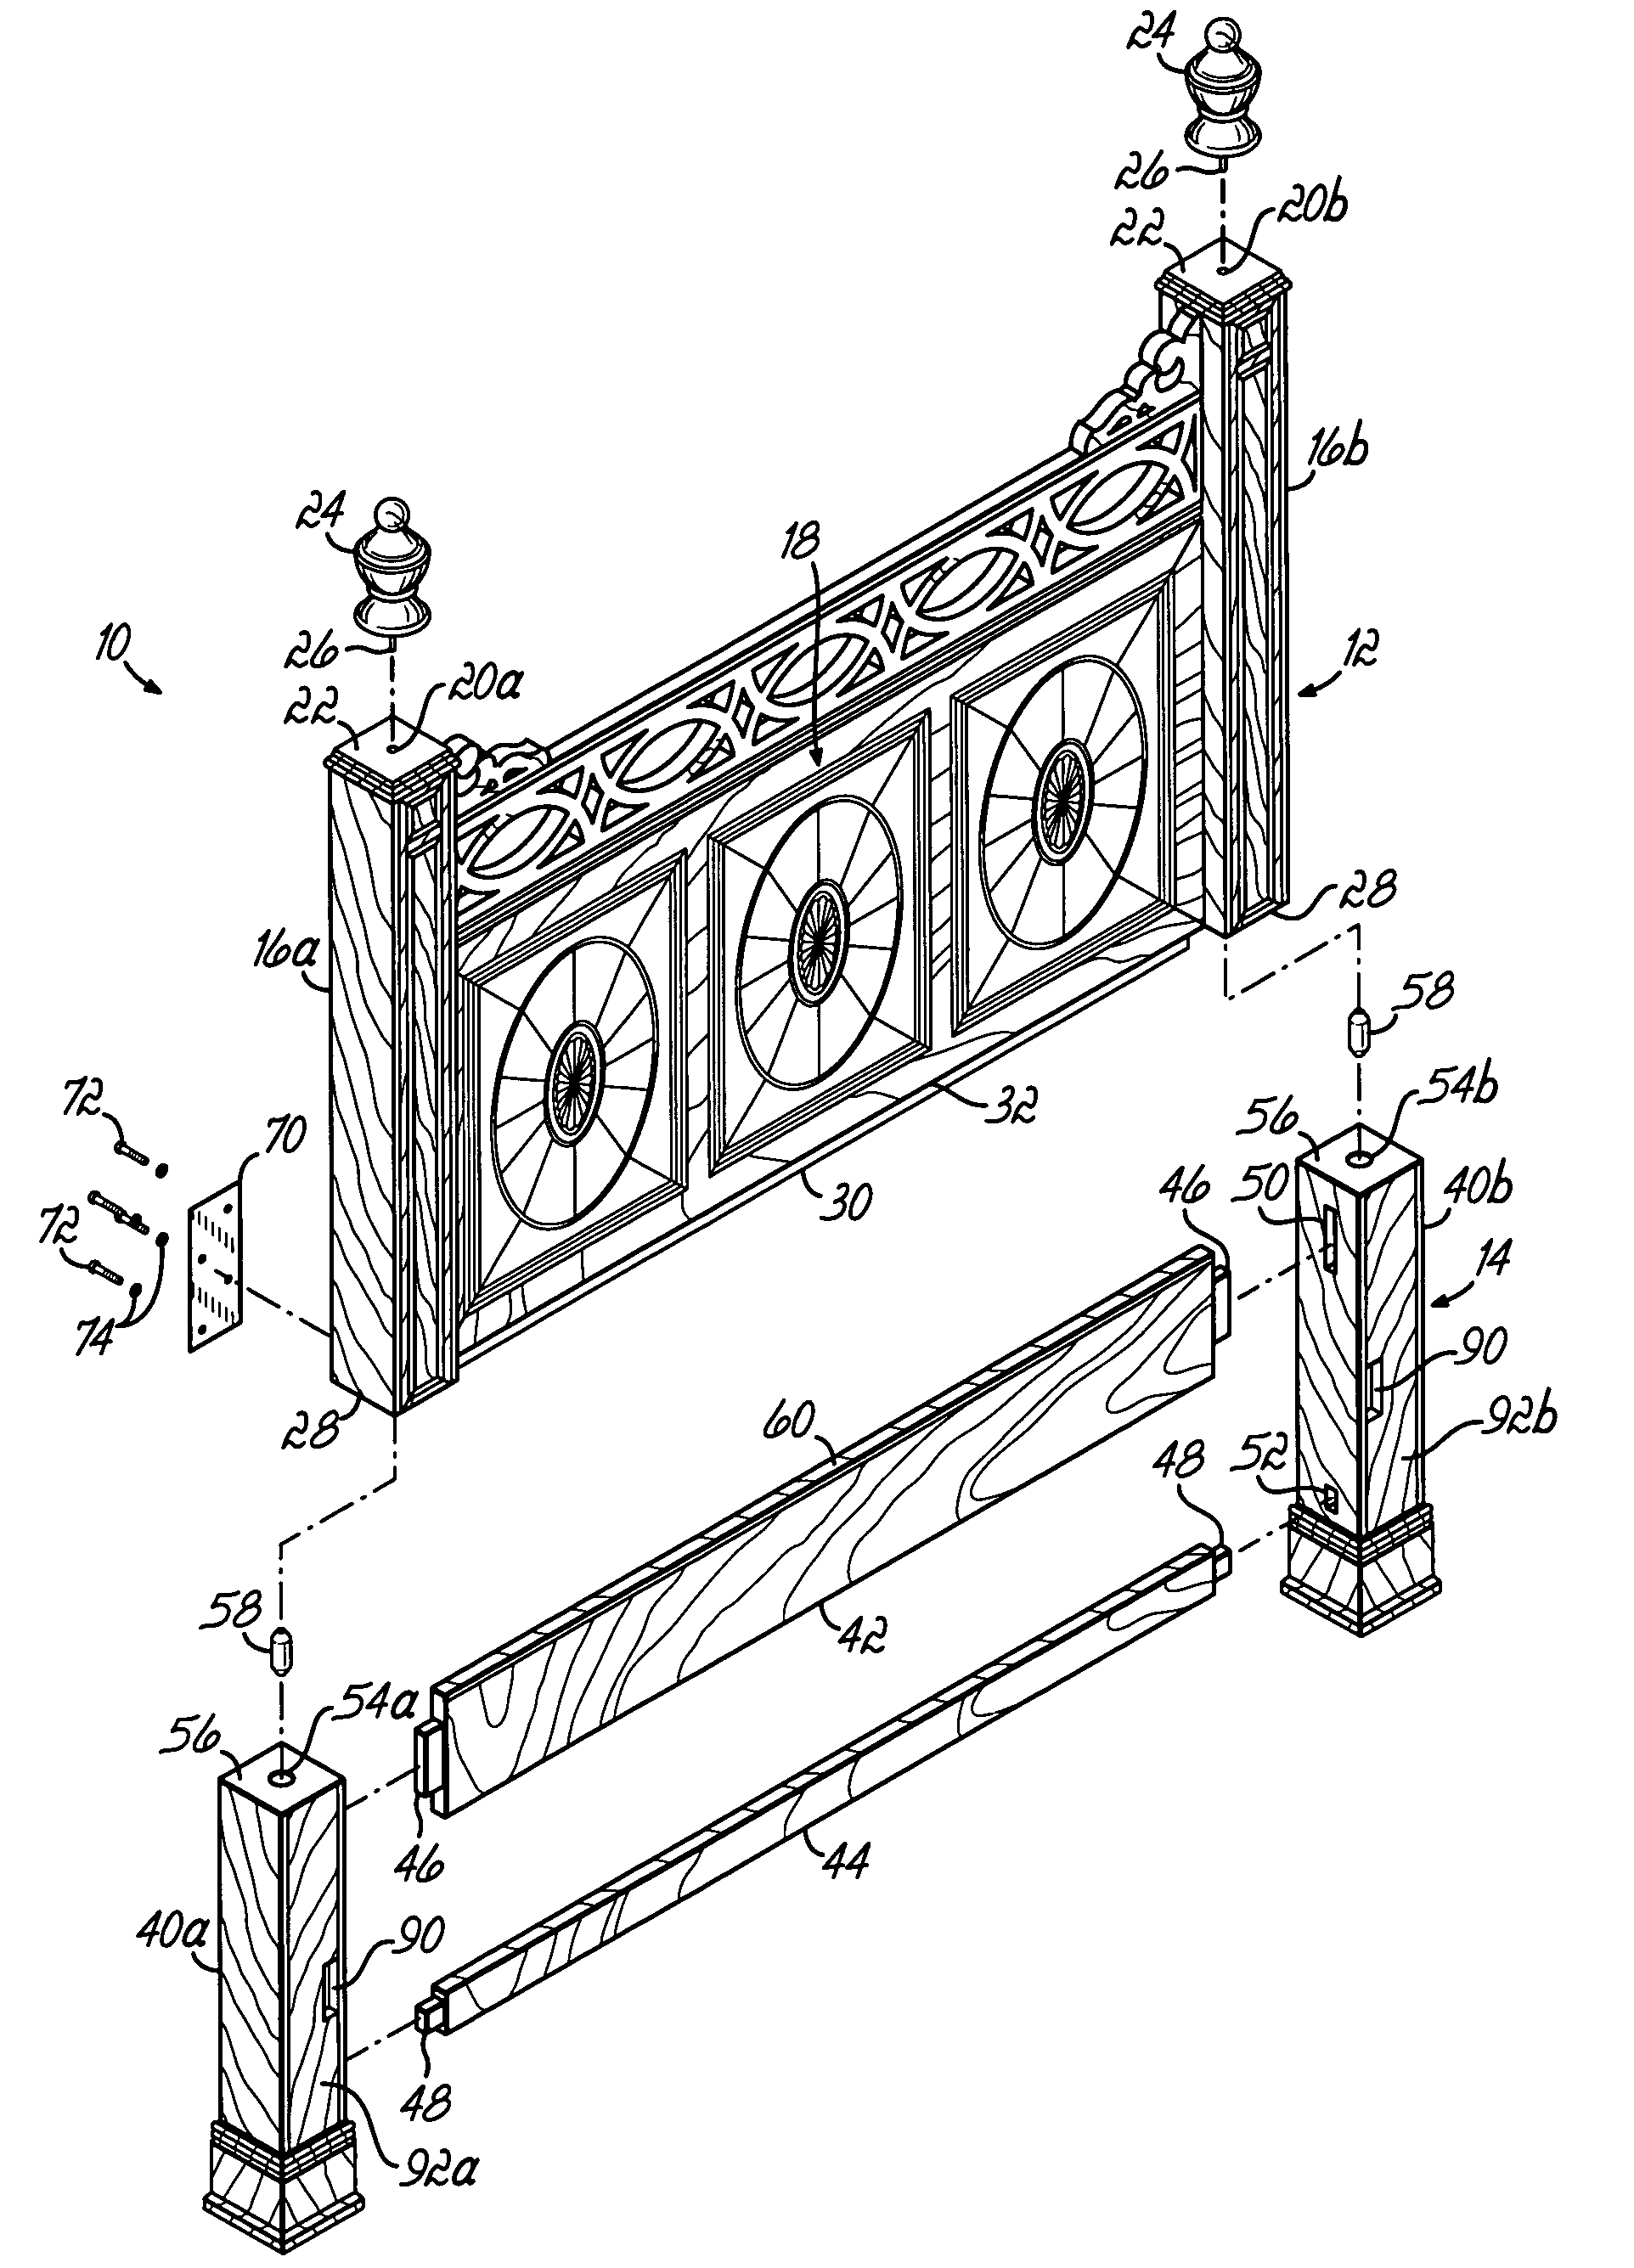 Modular headboard and method of assembly